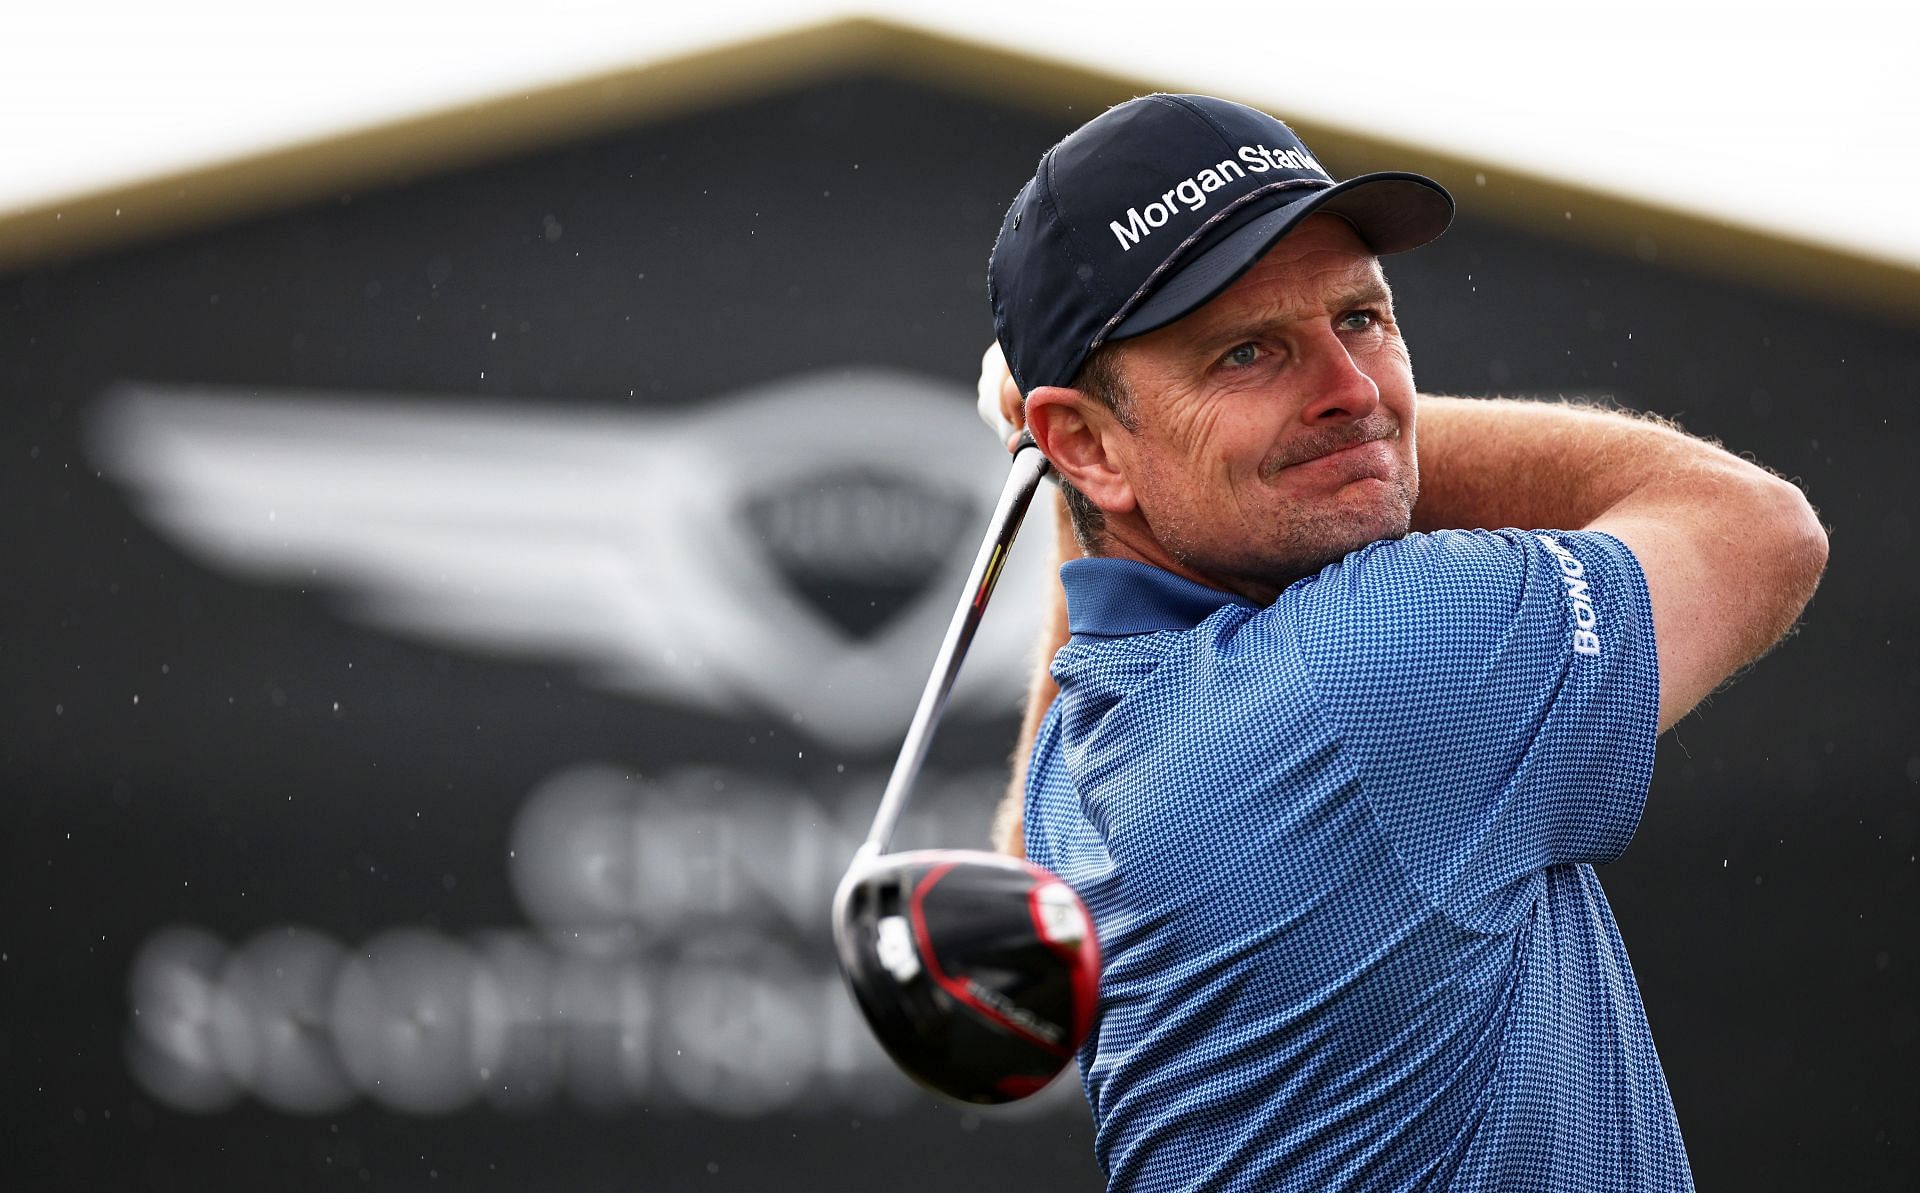 Justin Rose at Genesis Scottish Open - Day Two (Image via Getty)